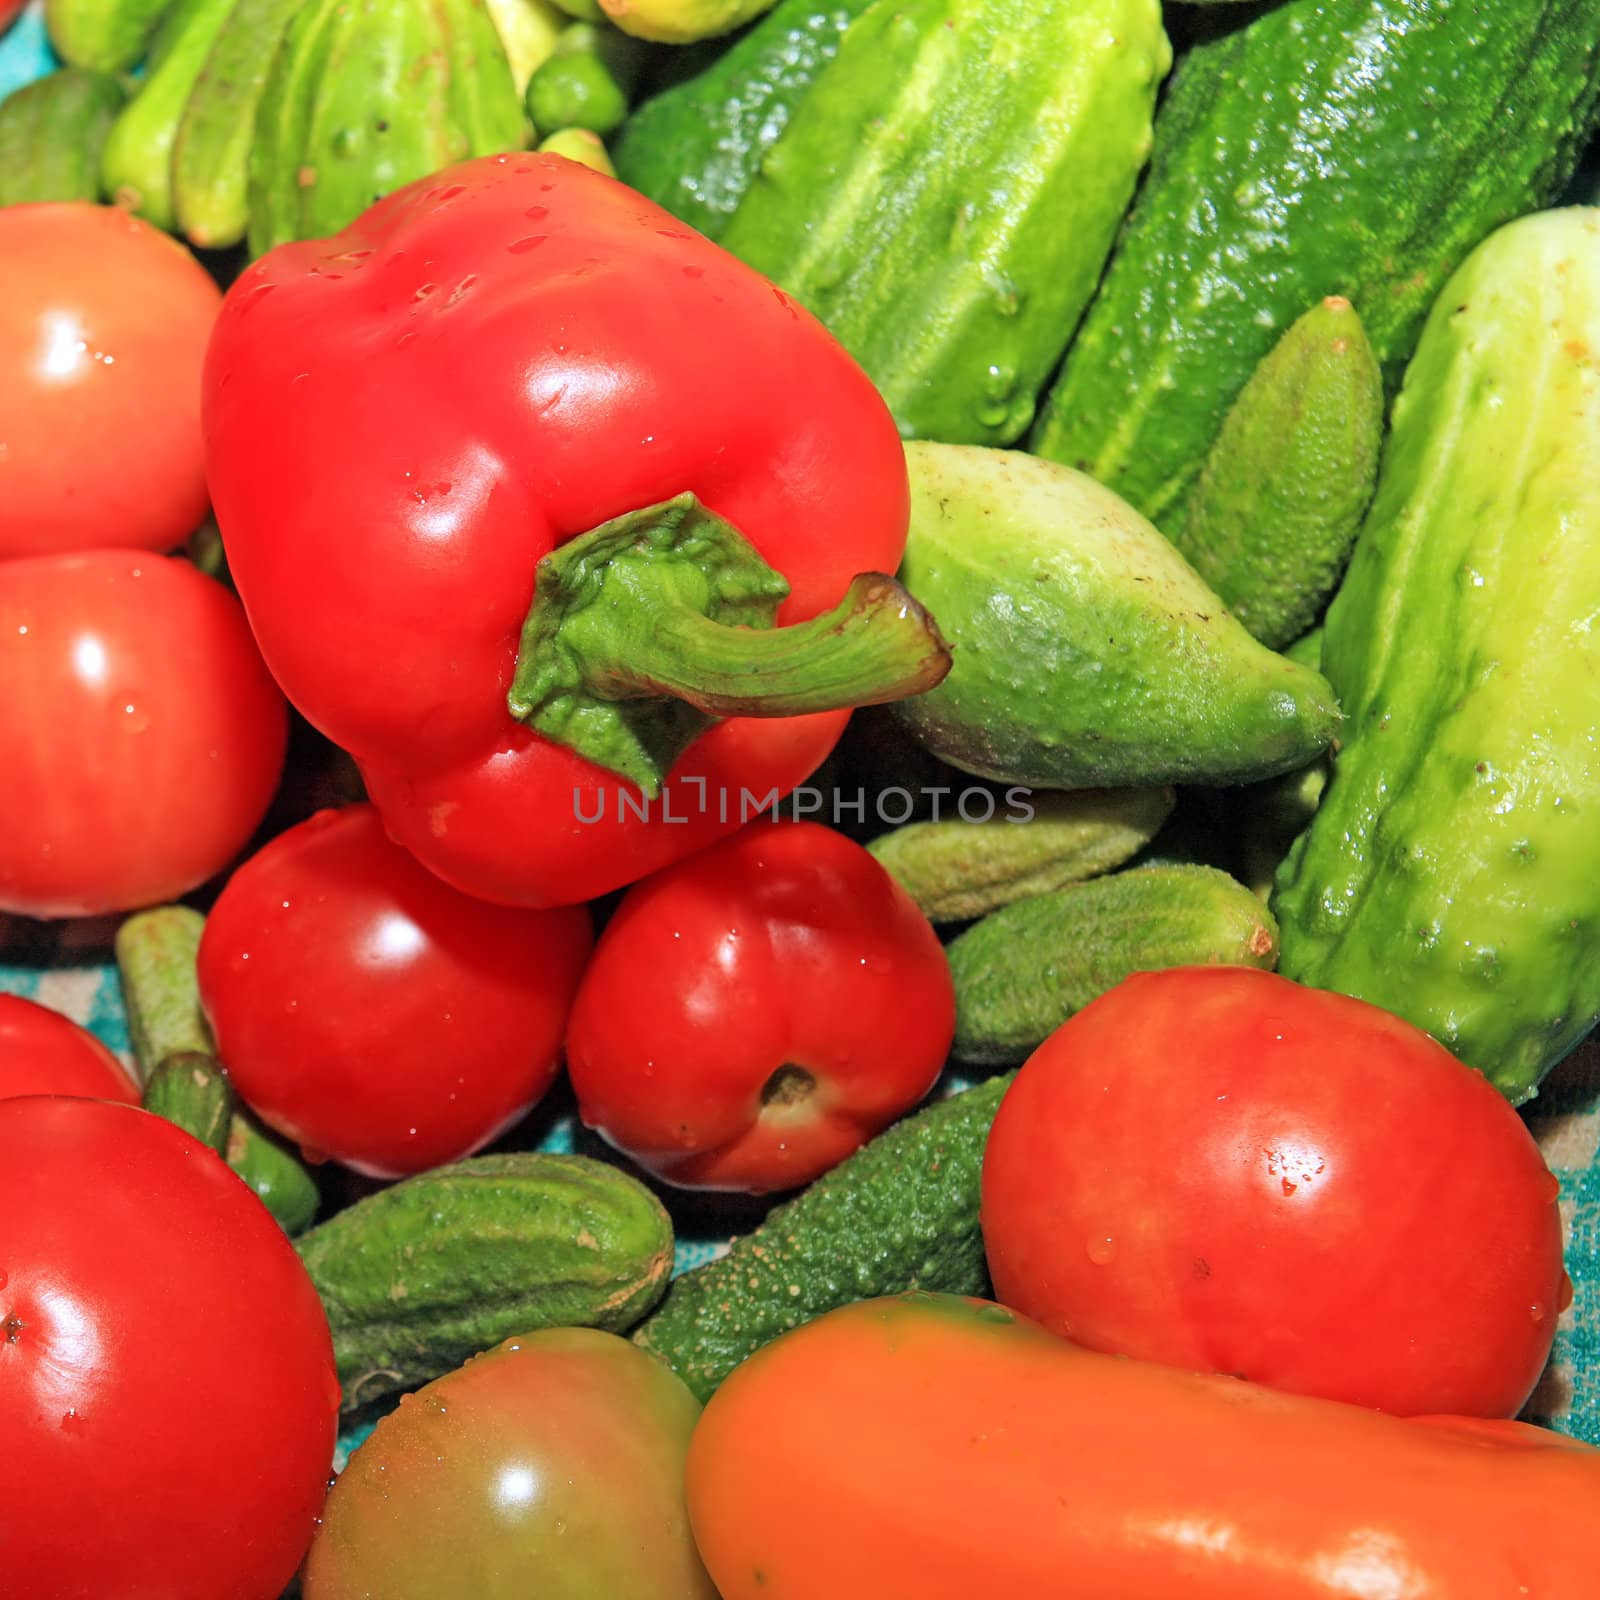 red pepper amongst cucumber and tomato by basel101658